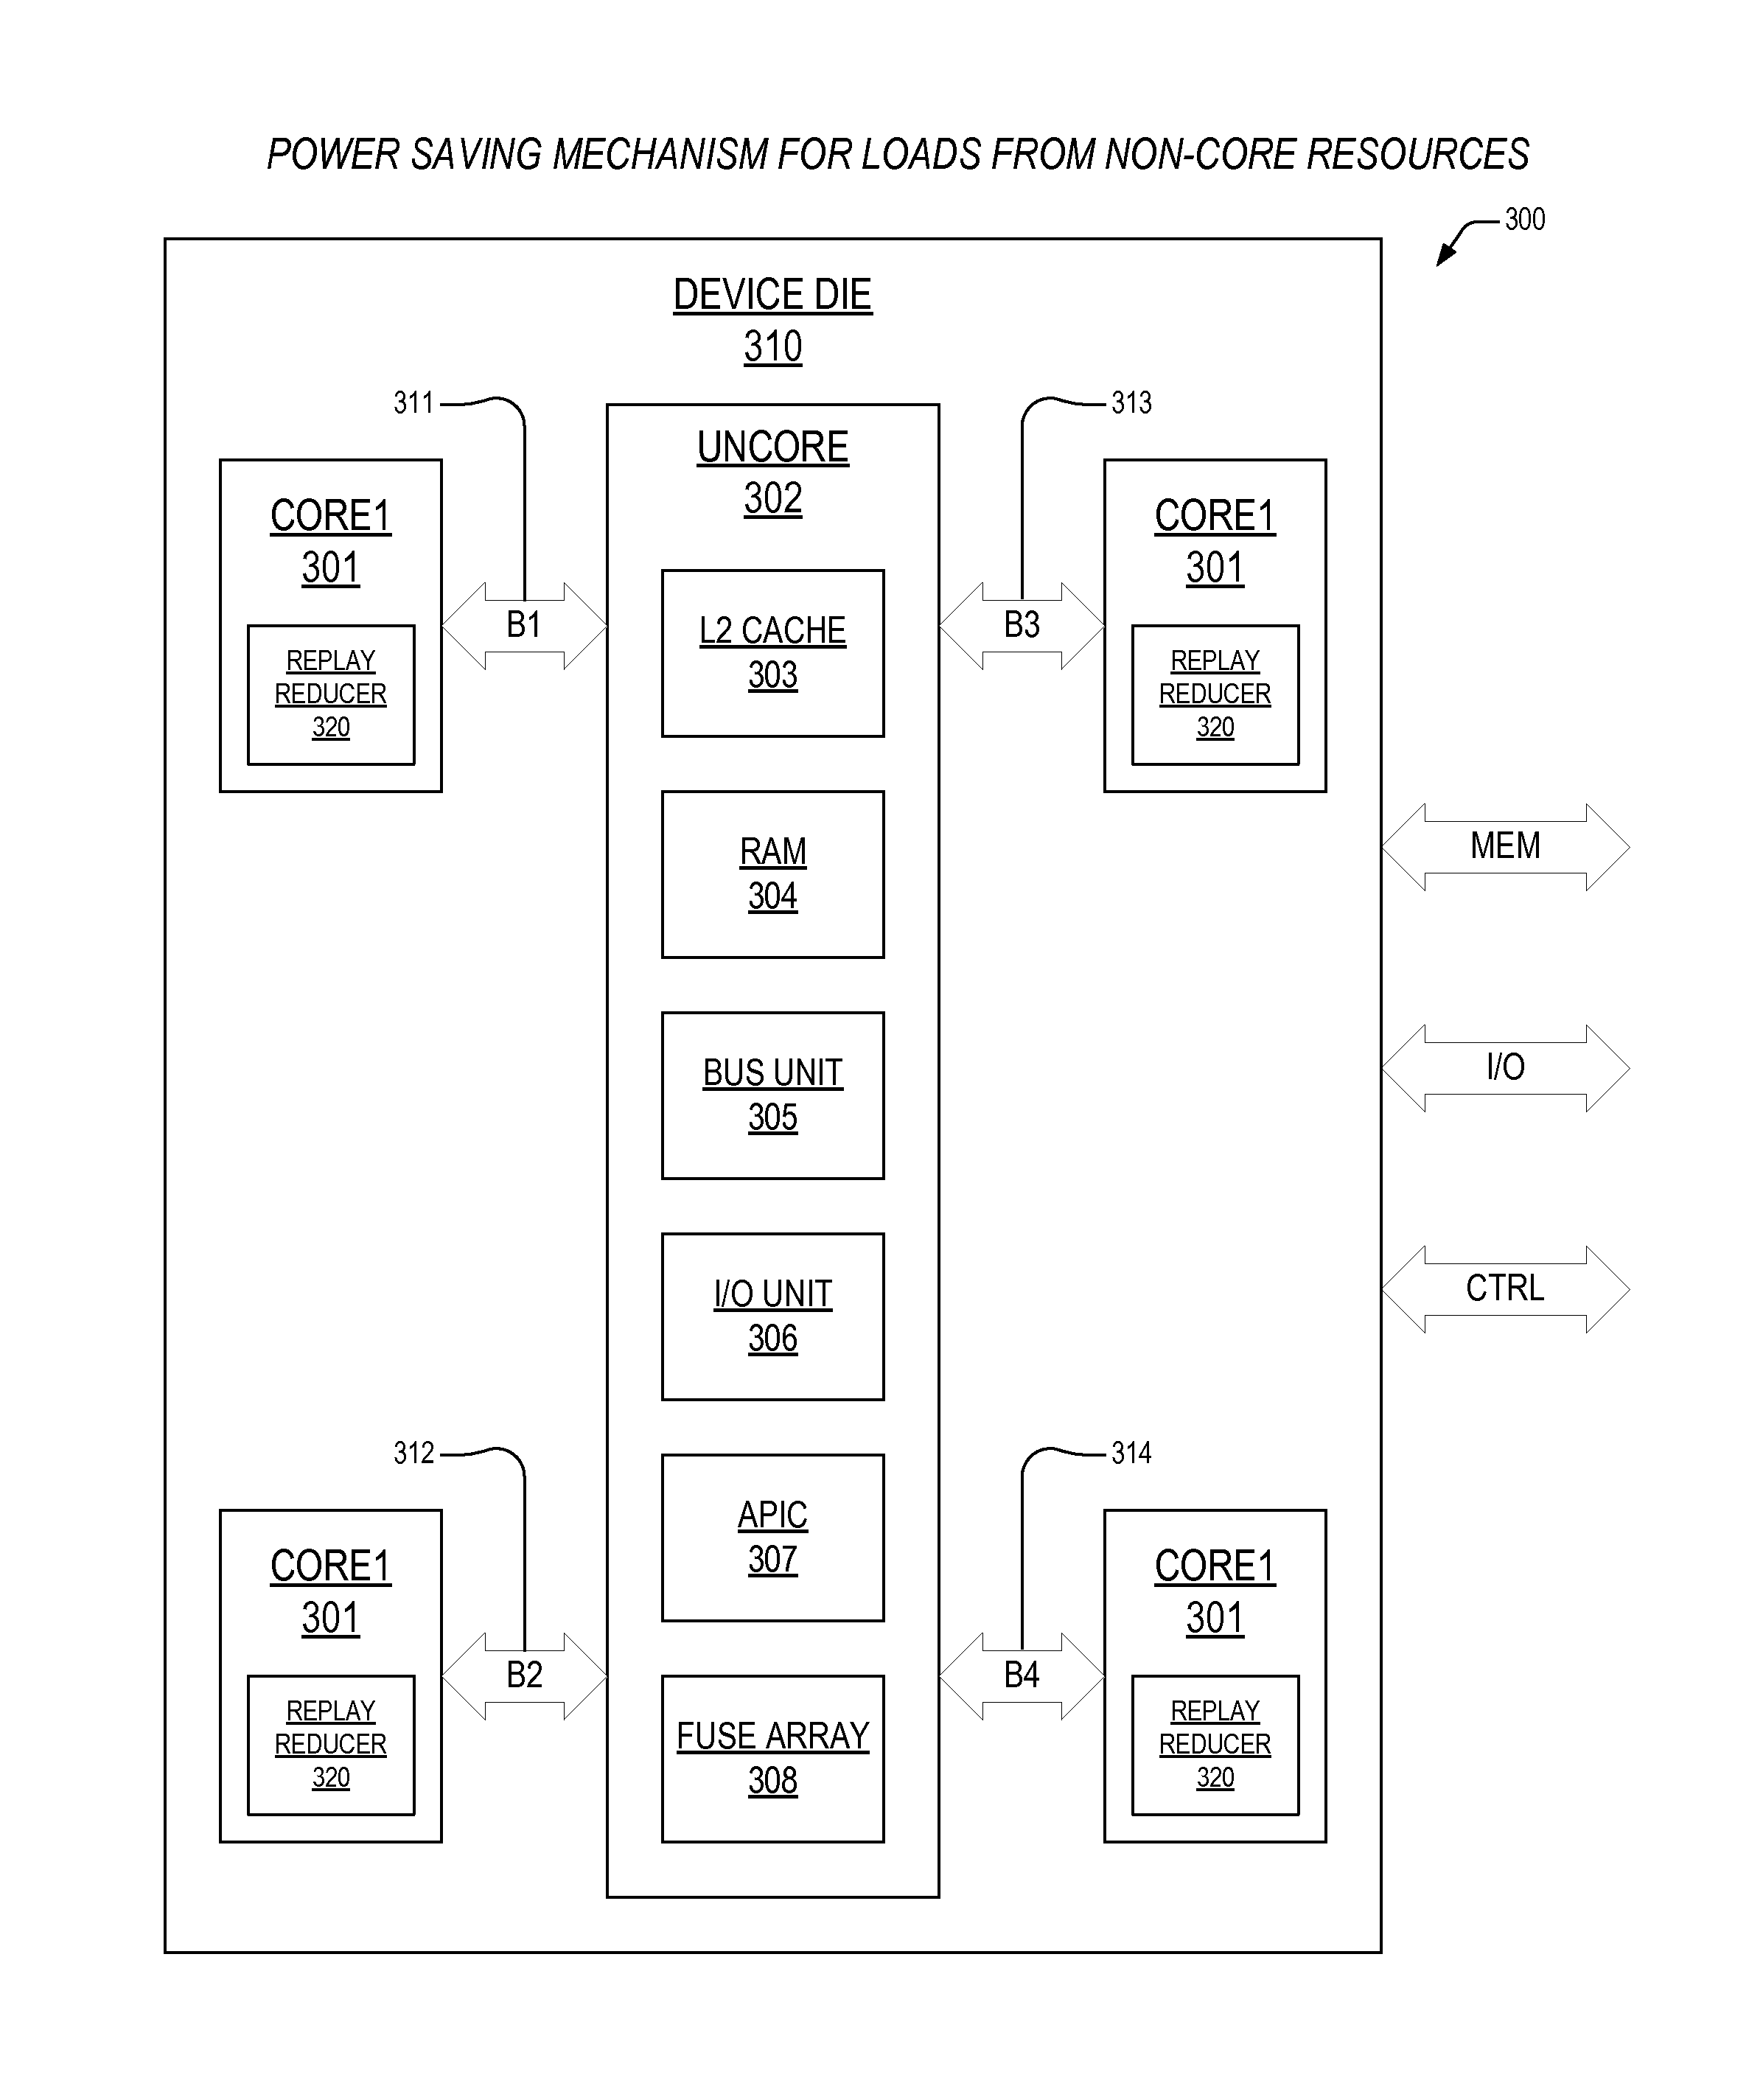 Programmable load replay precluding mechanism